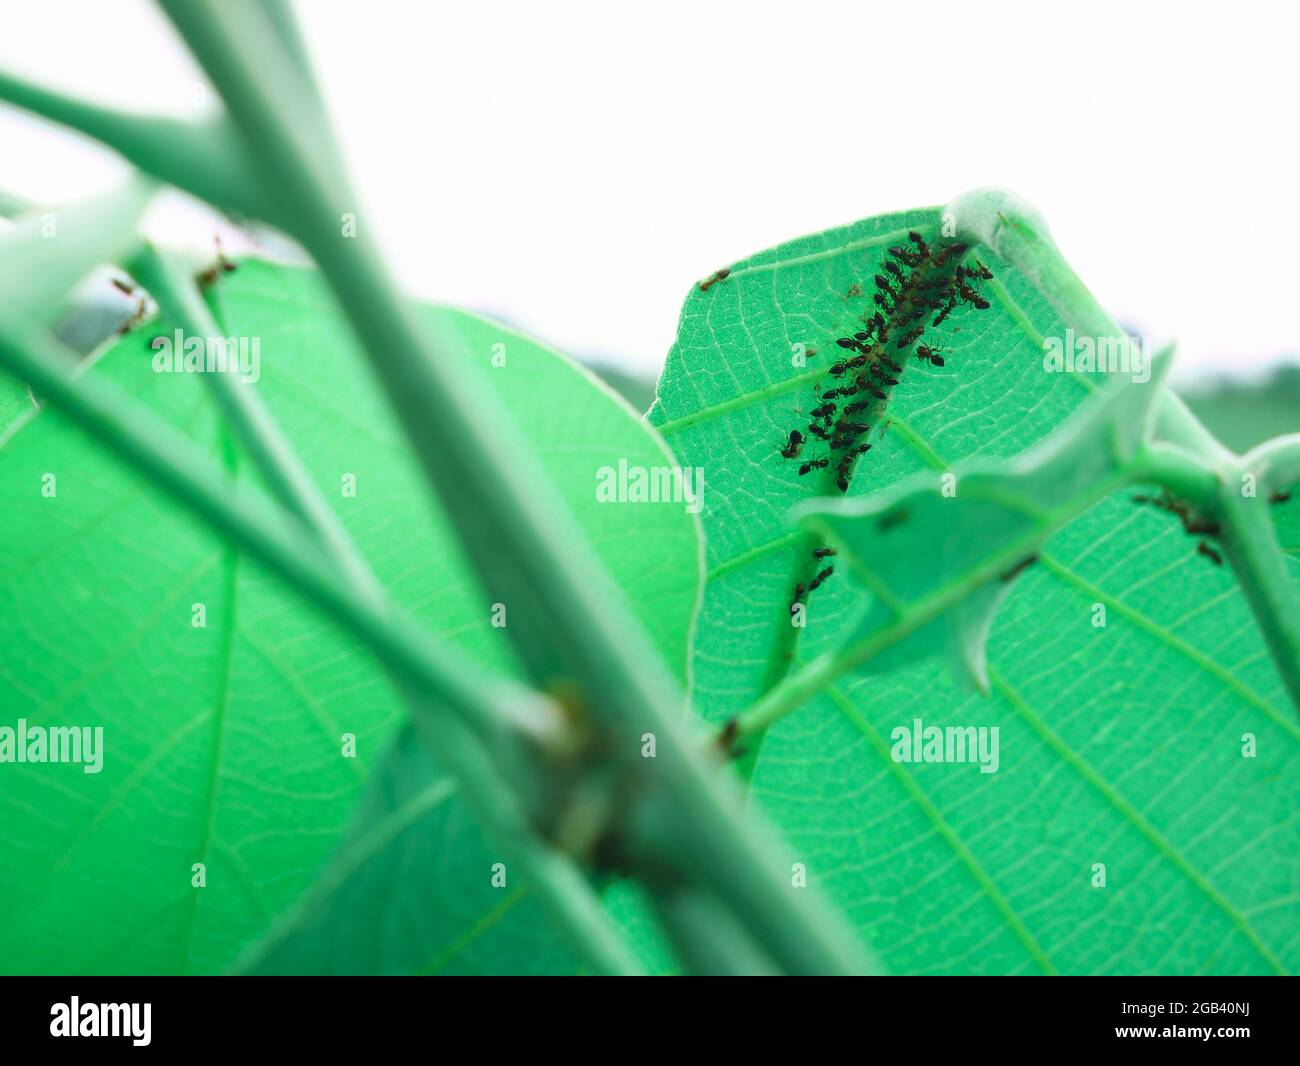 Group of ant image on leaf top corner frame shot, Nature background with text space, Indian insect presentation. Stock Photo